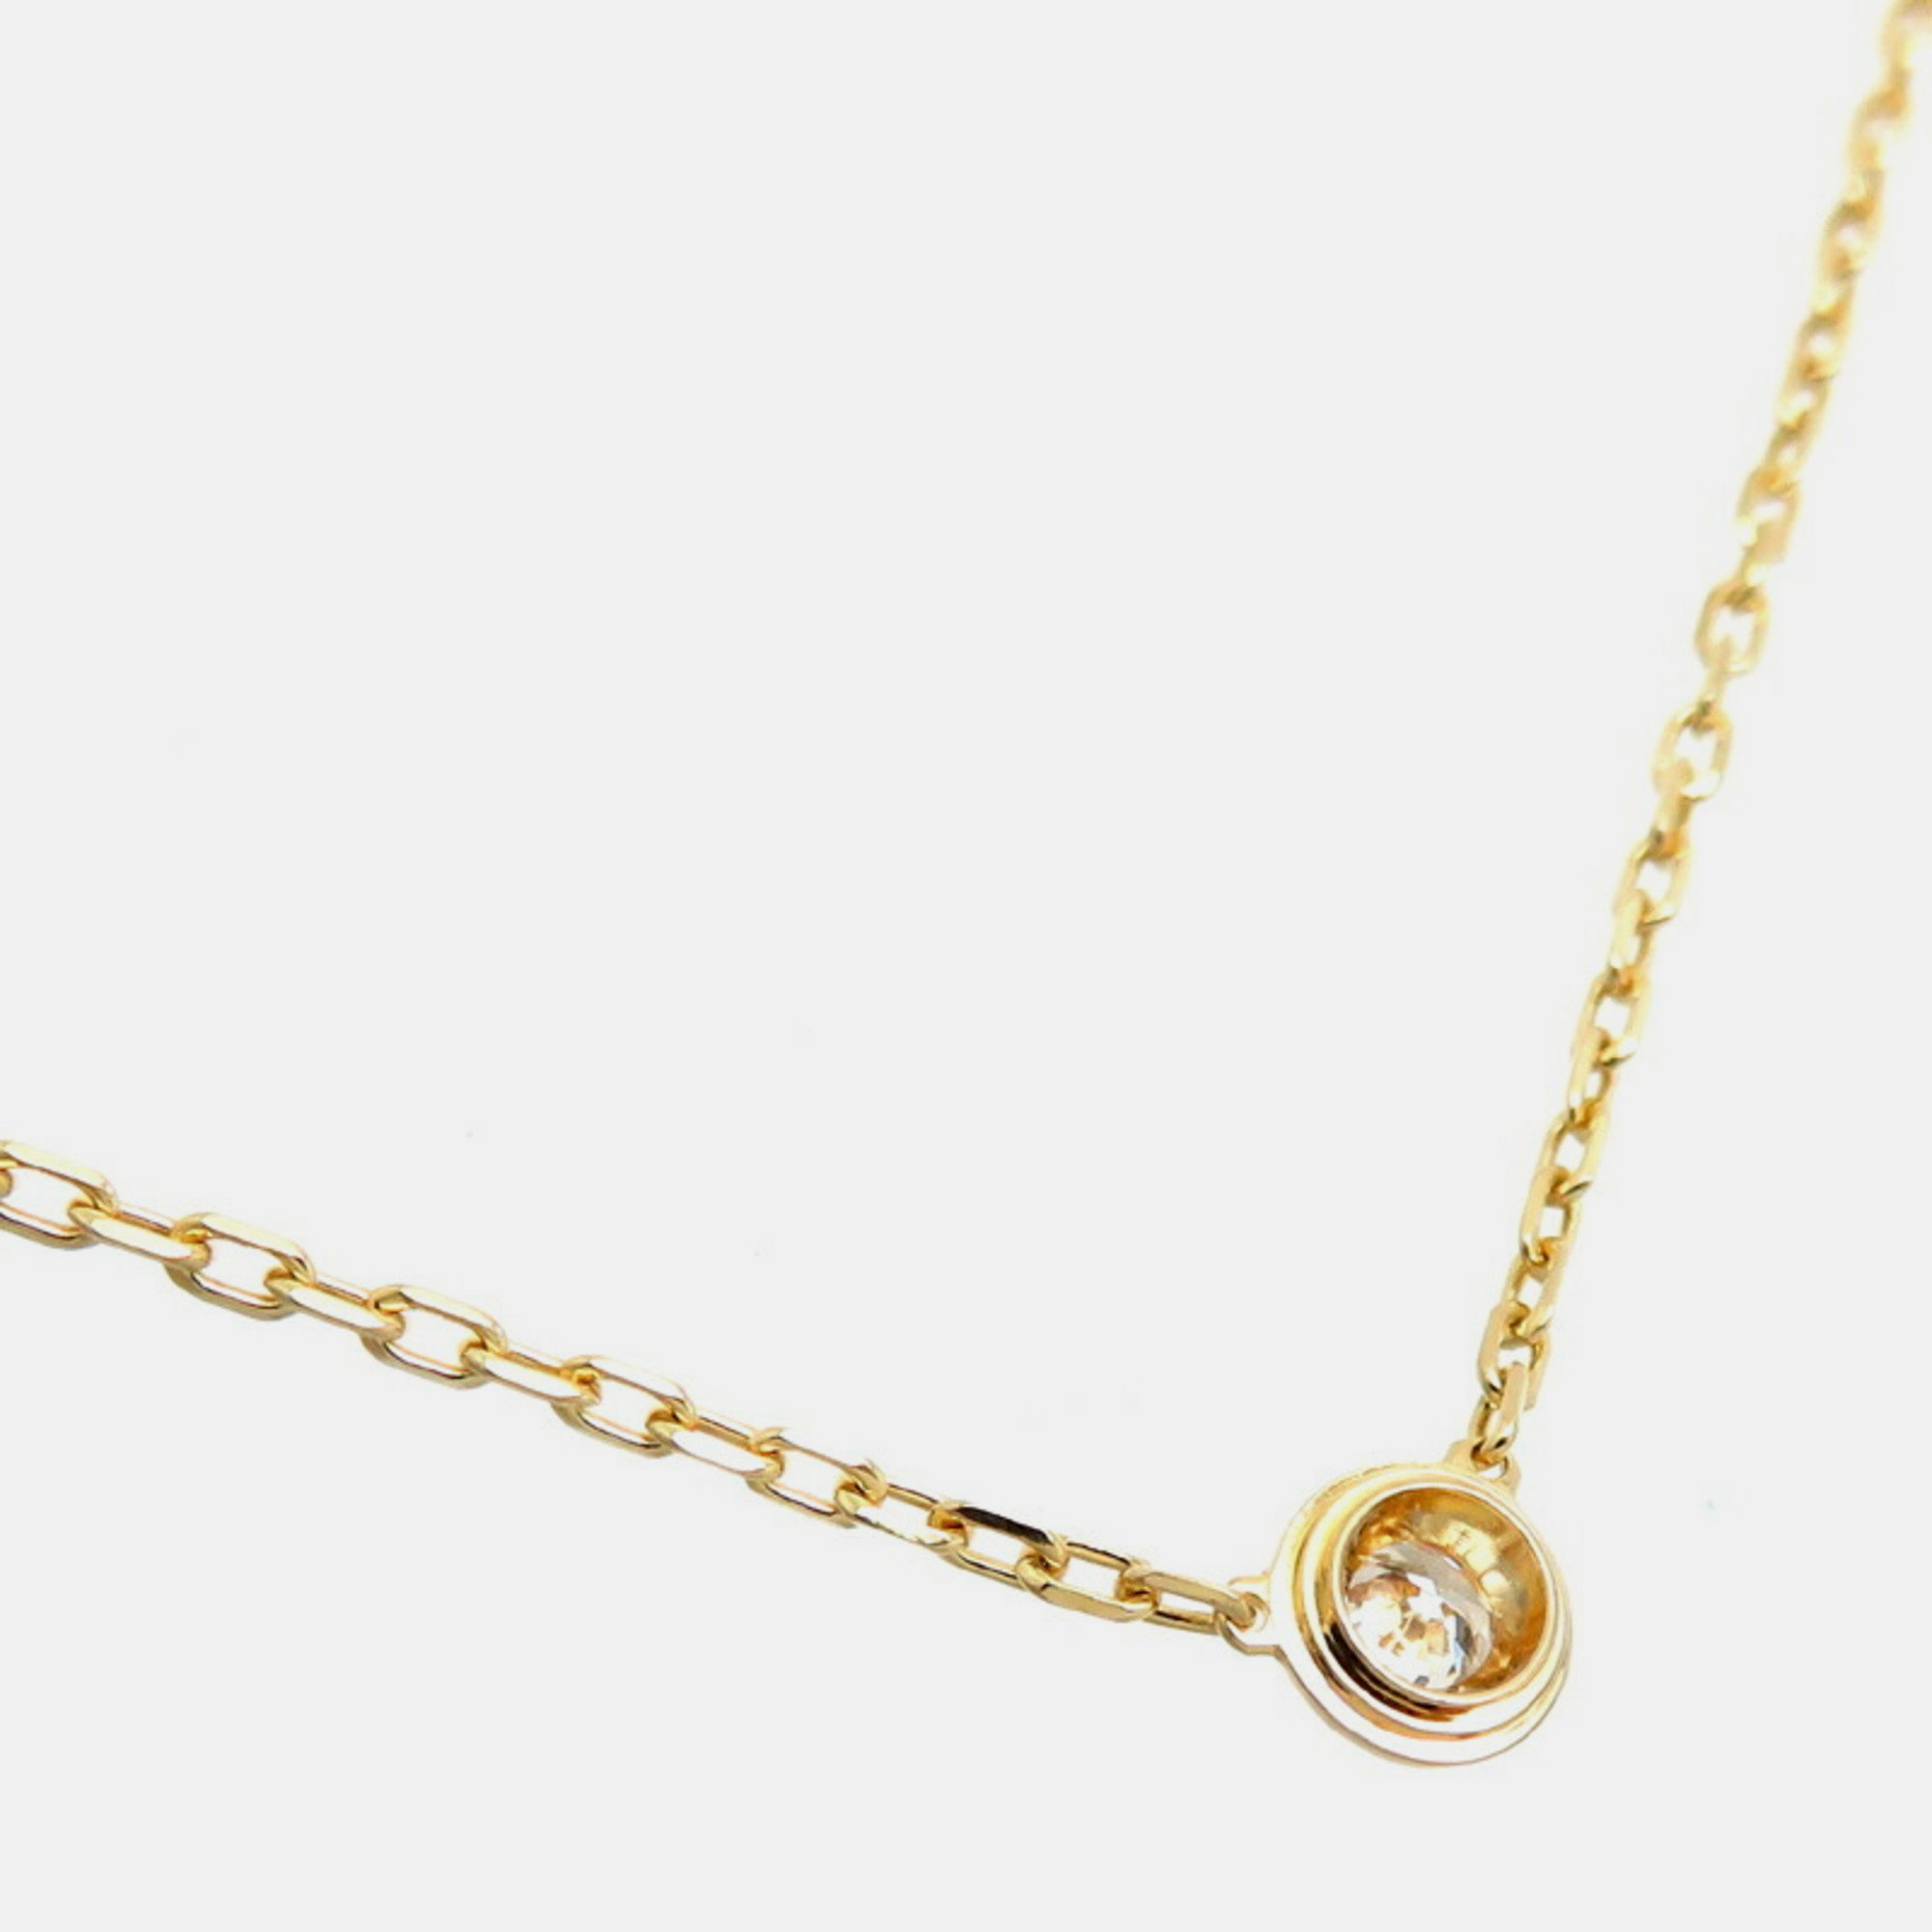 Cartier D'amour Small 18K Yellow Gold Diamond Necklace